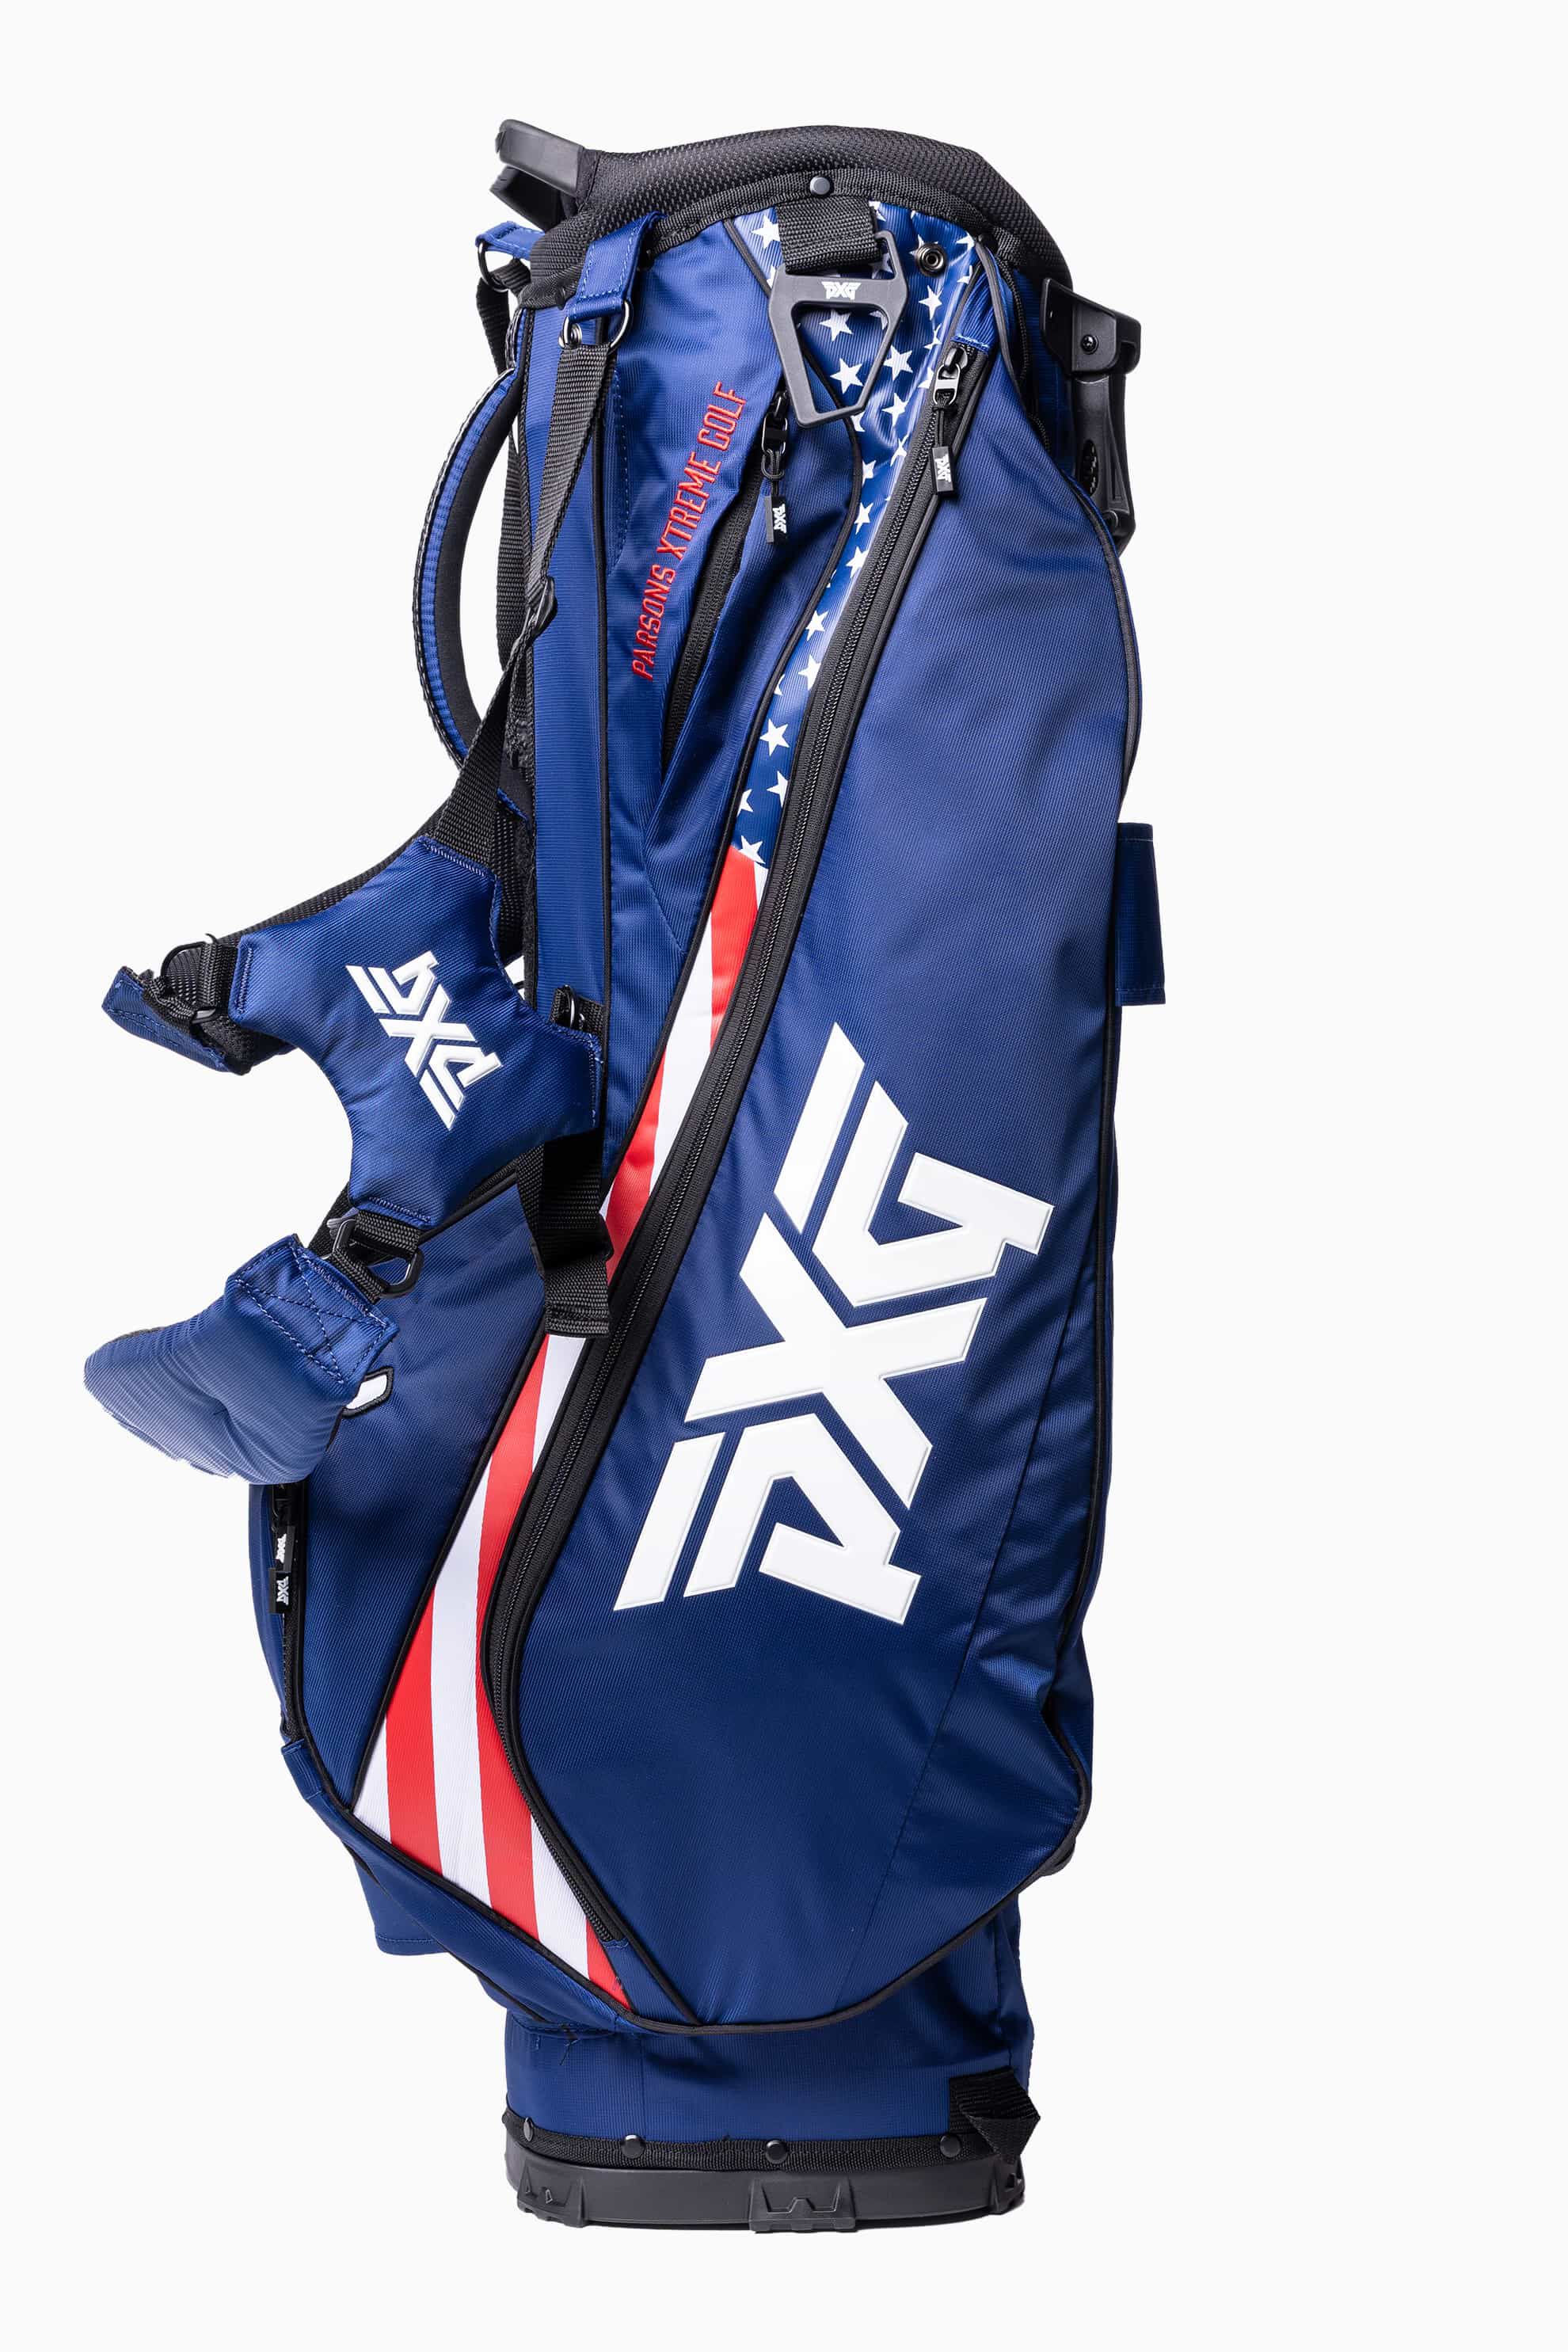 SUNDAY GOLF OFFICIALLY LAUNCHES NEWEST MODEL LOMA XL TO LINEUP OF LIGHTWEIGHT  GOLF BAGS  The Golf Wire